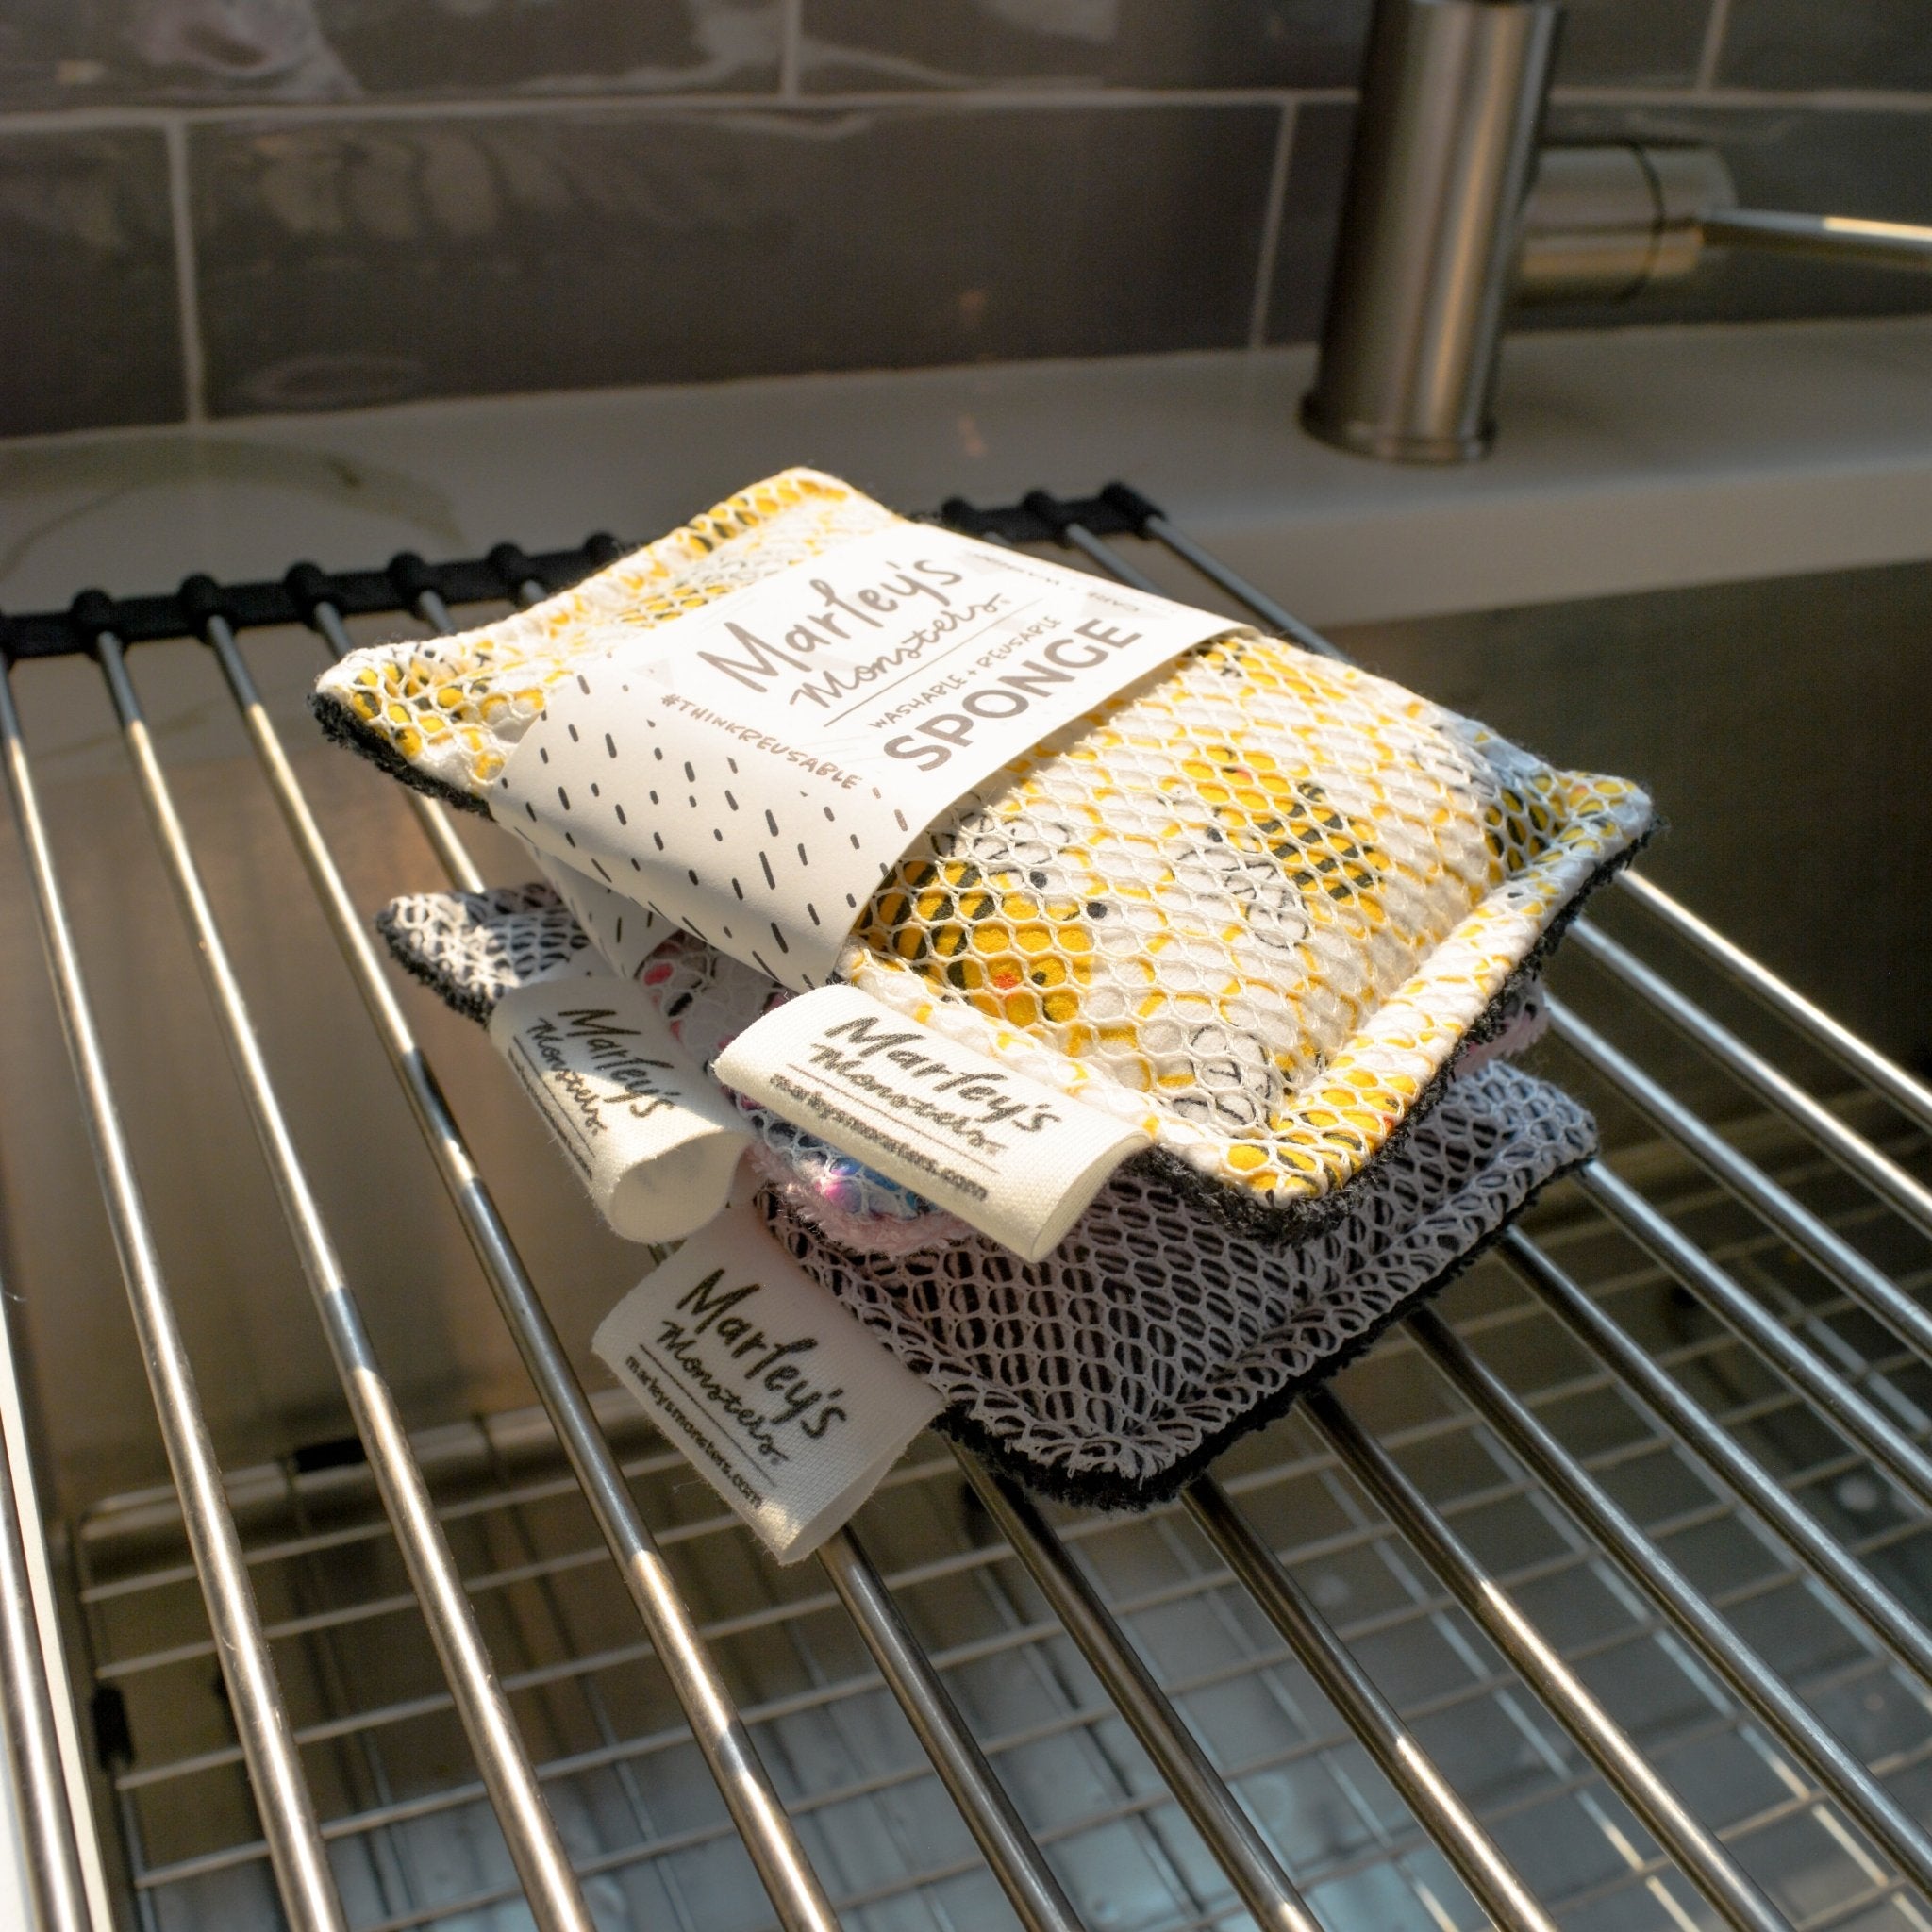 Dish Wash Net Mesh Cloth Durable Non-Scratch Dish Rags for Washing Dishes  Quick Dry Dish Sponges for Washing Dishes 